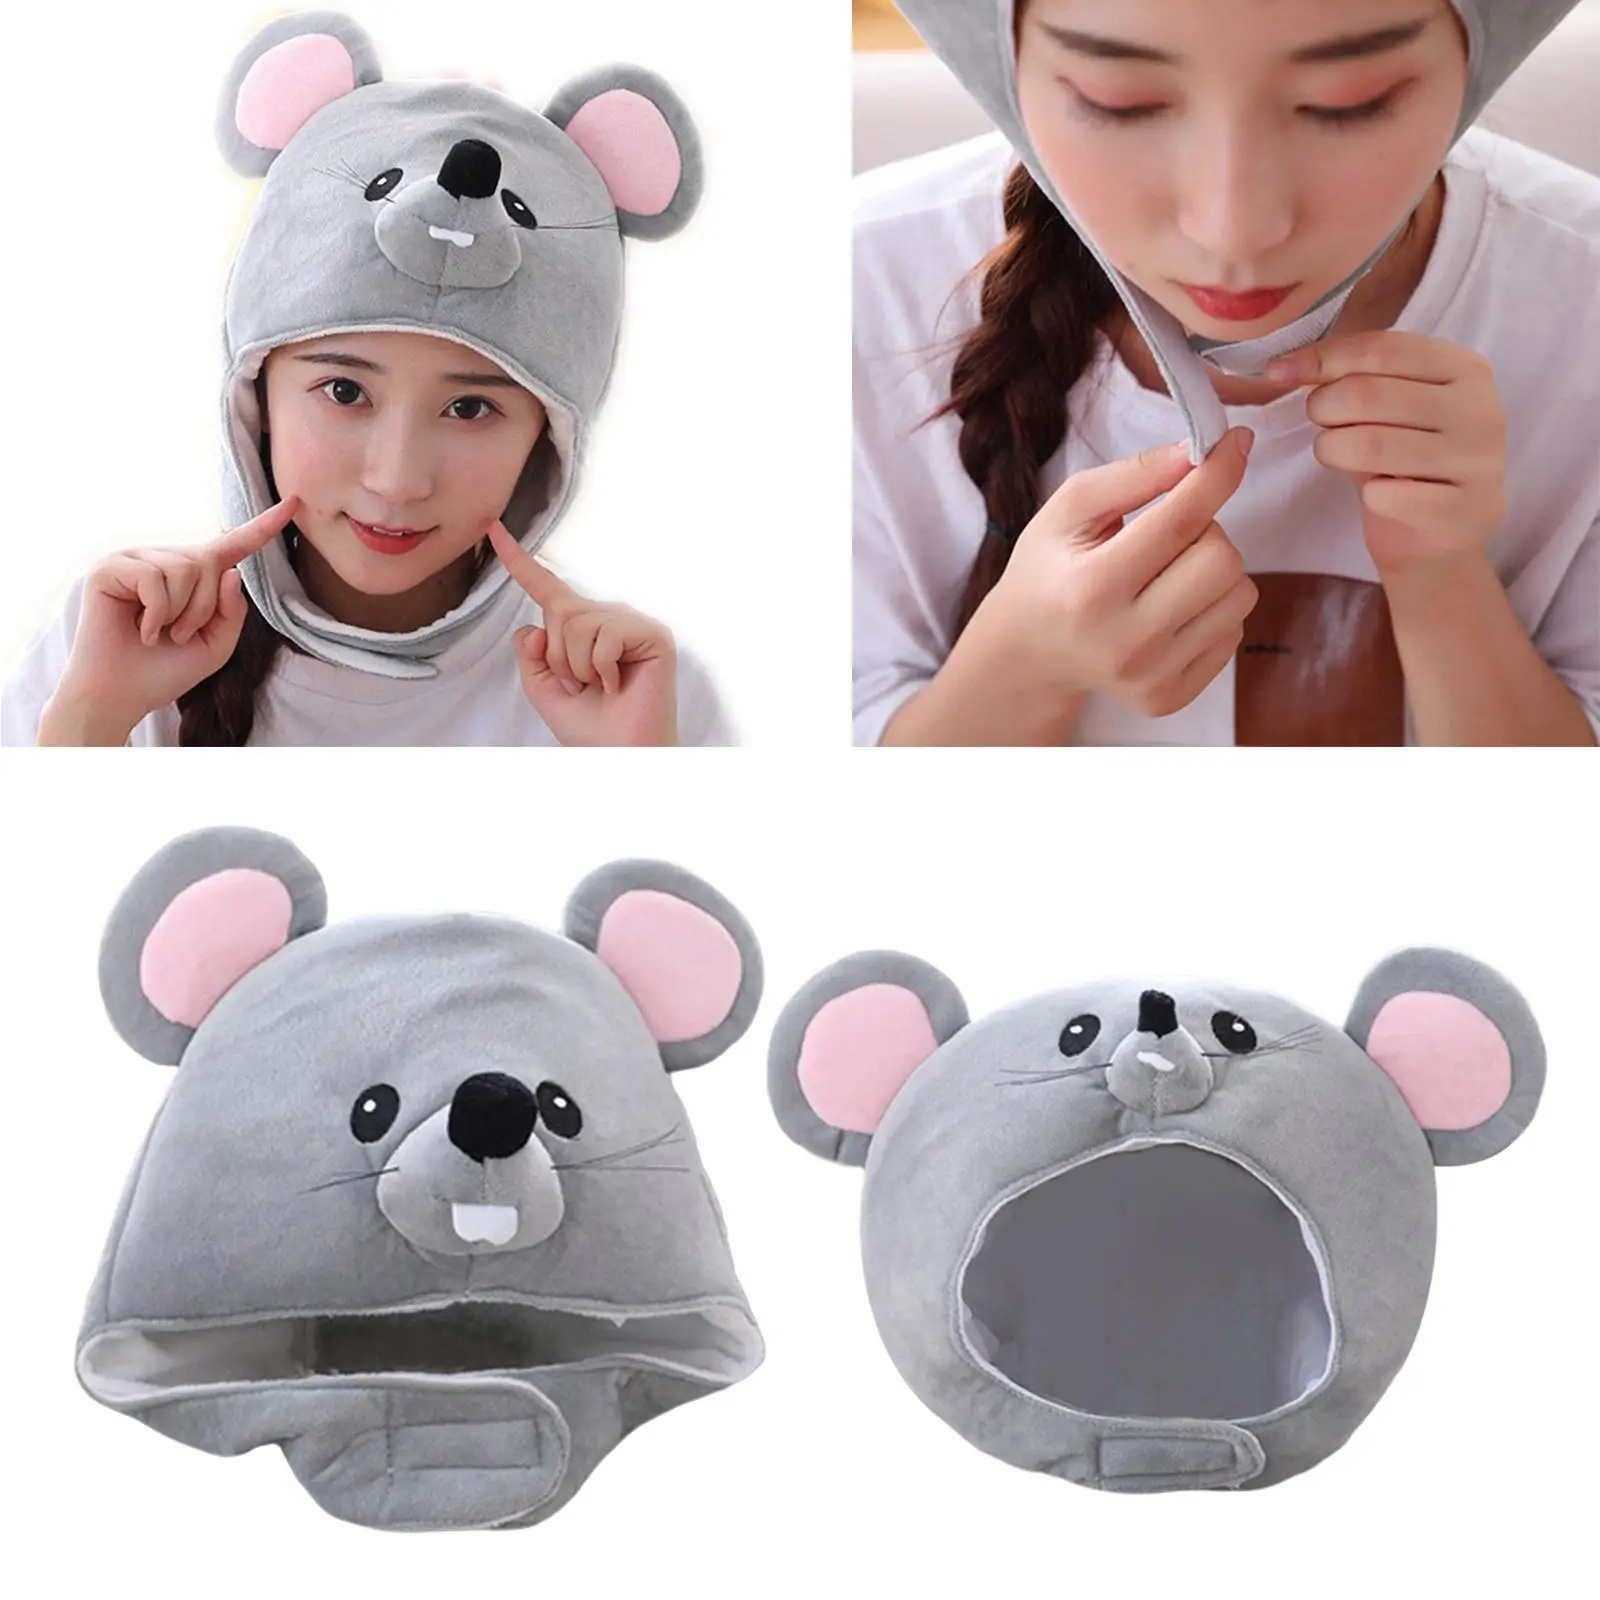 Warm Mouse Hat Kids Gifts Photography Props Headband Gray Funny for Fancy Dress Party Cosplay Selfie Accessories